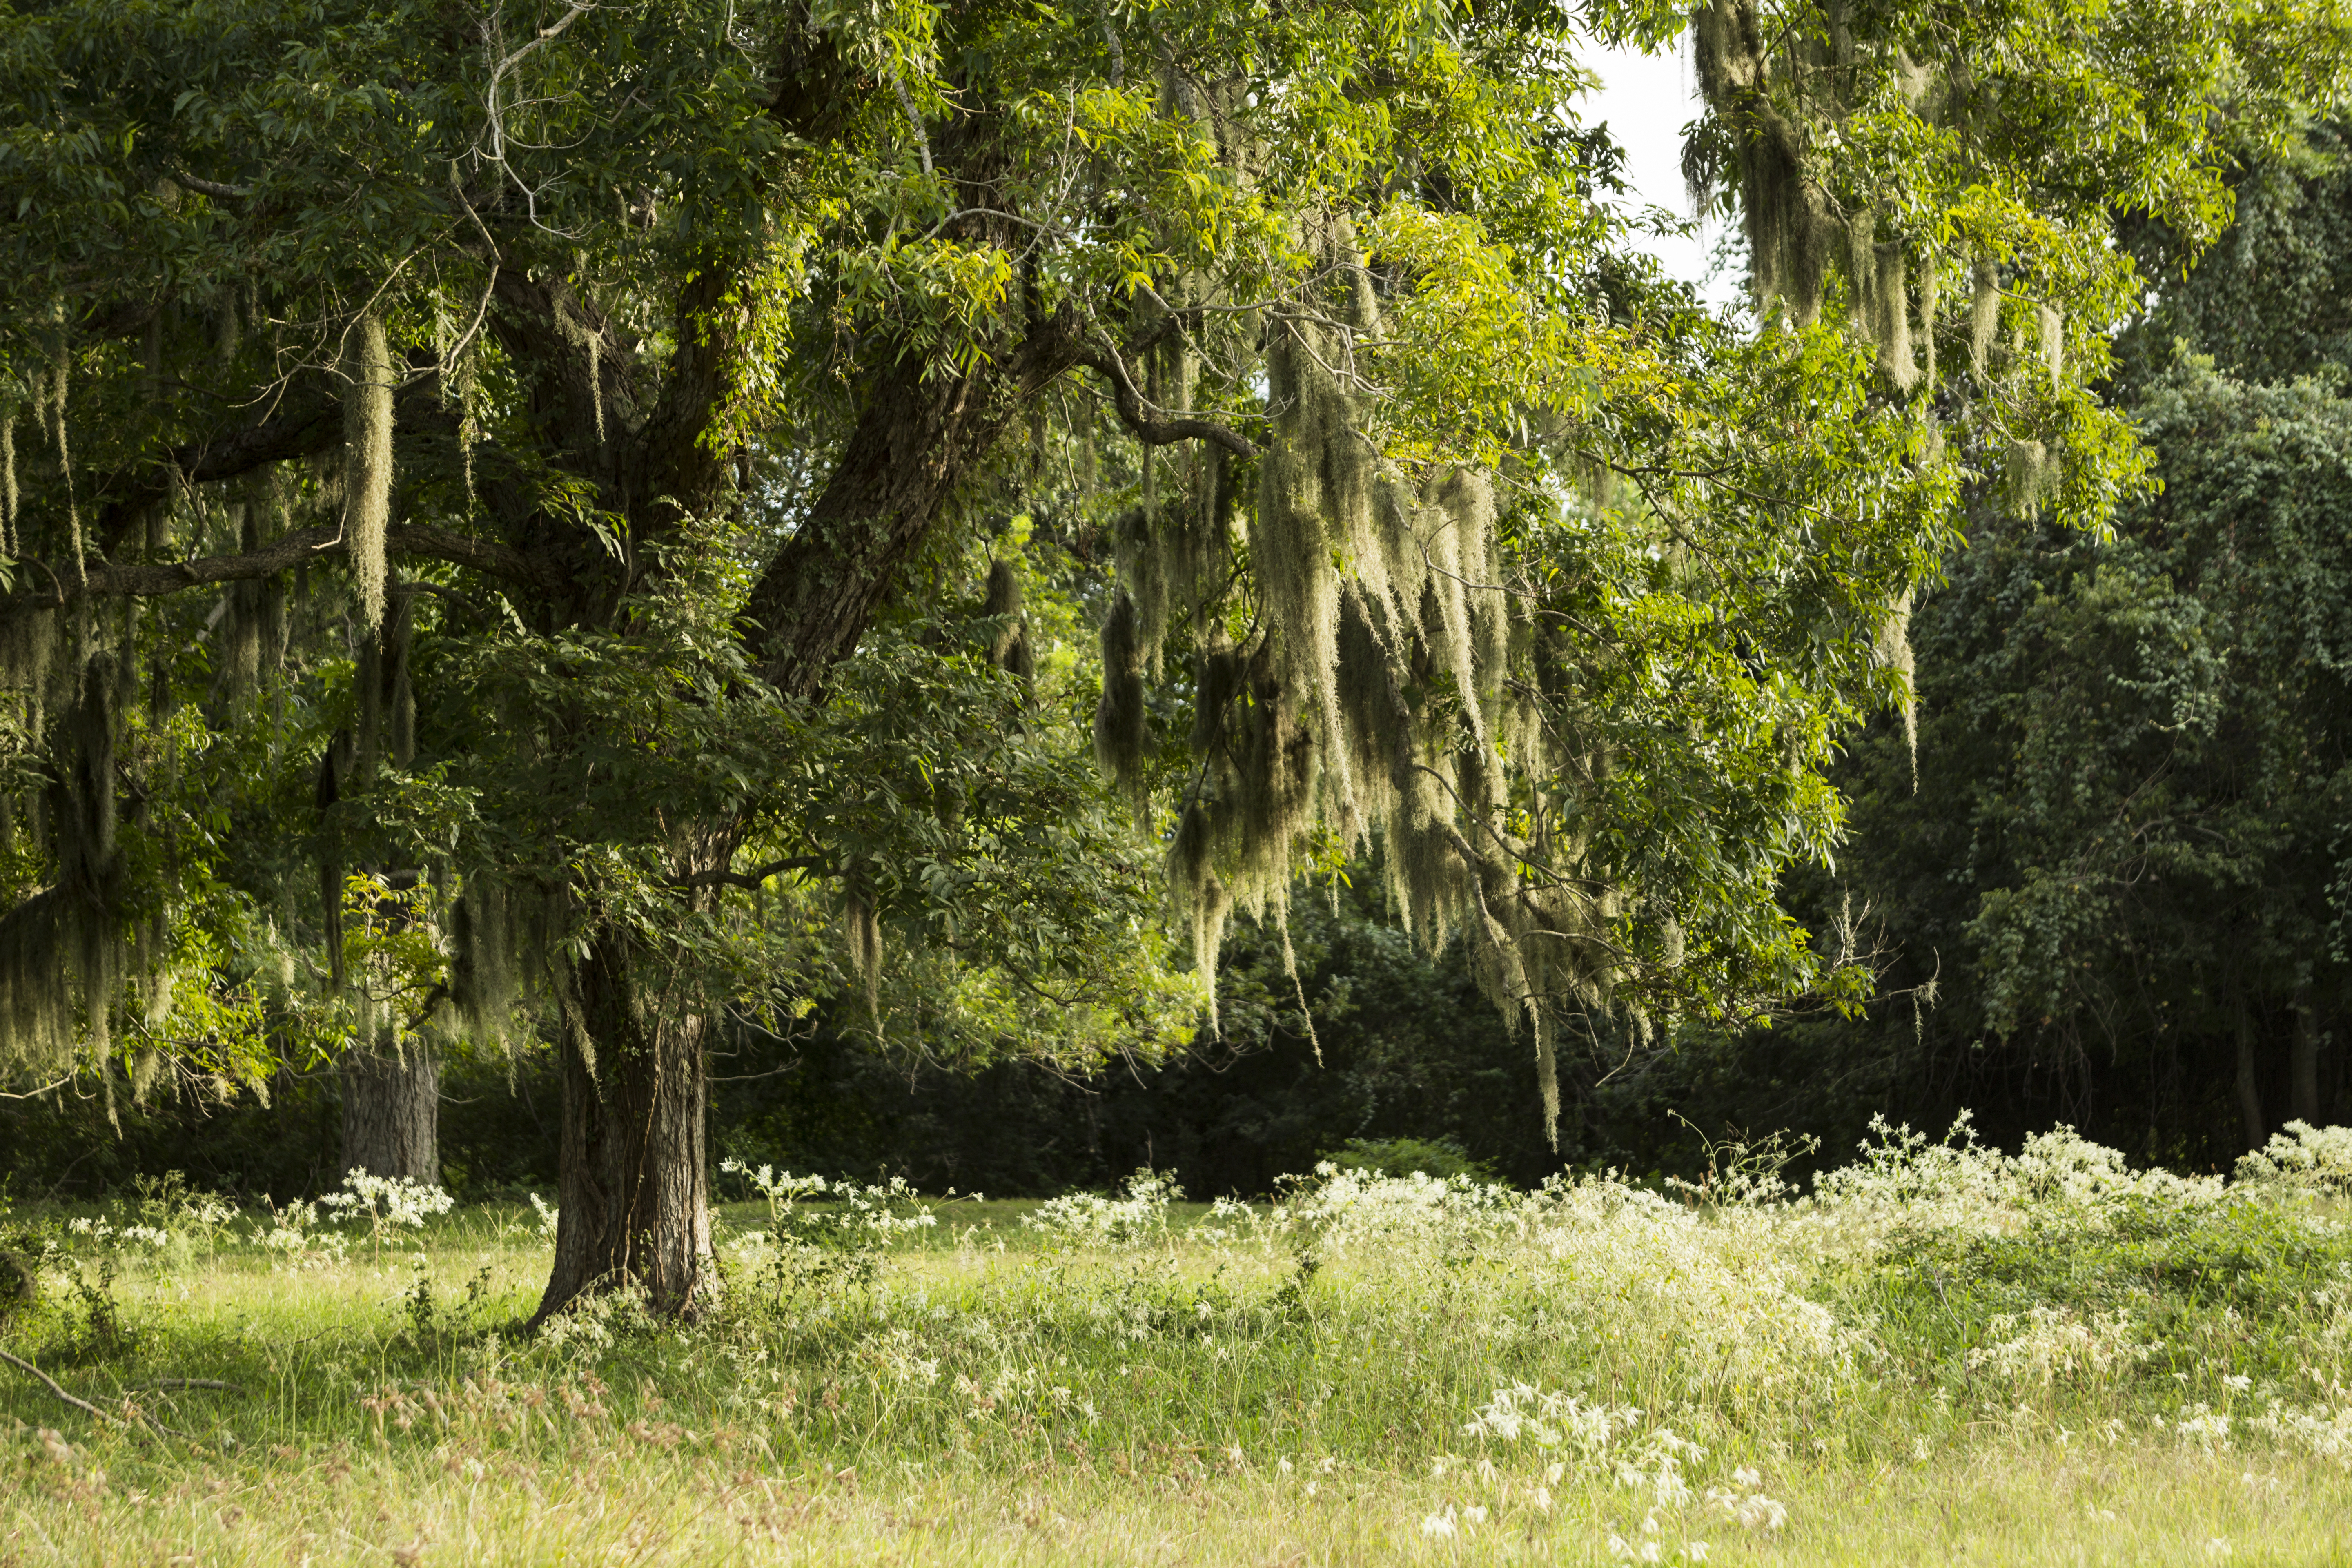 The newly-acquired acreage is part of the Columbia Bottomlands Project